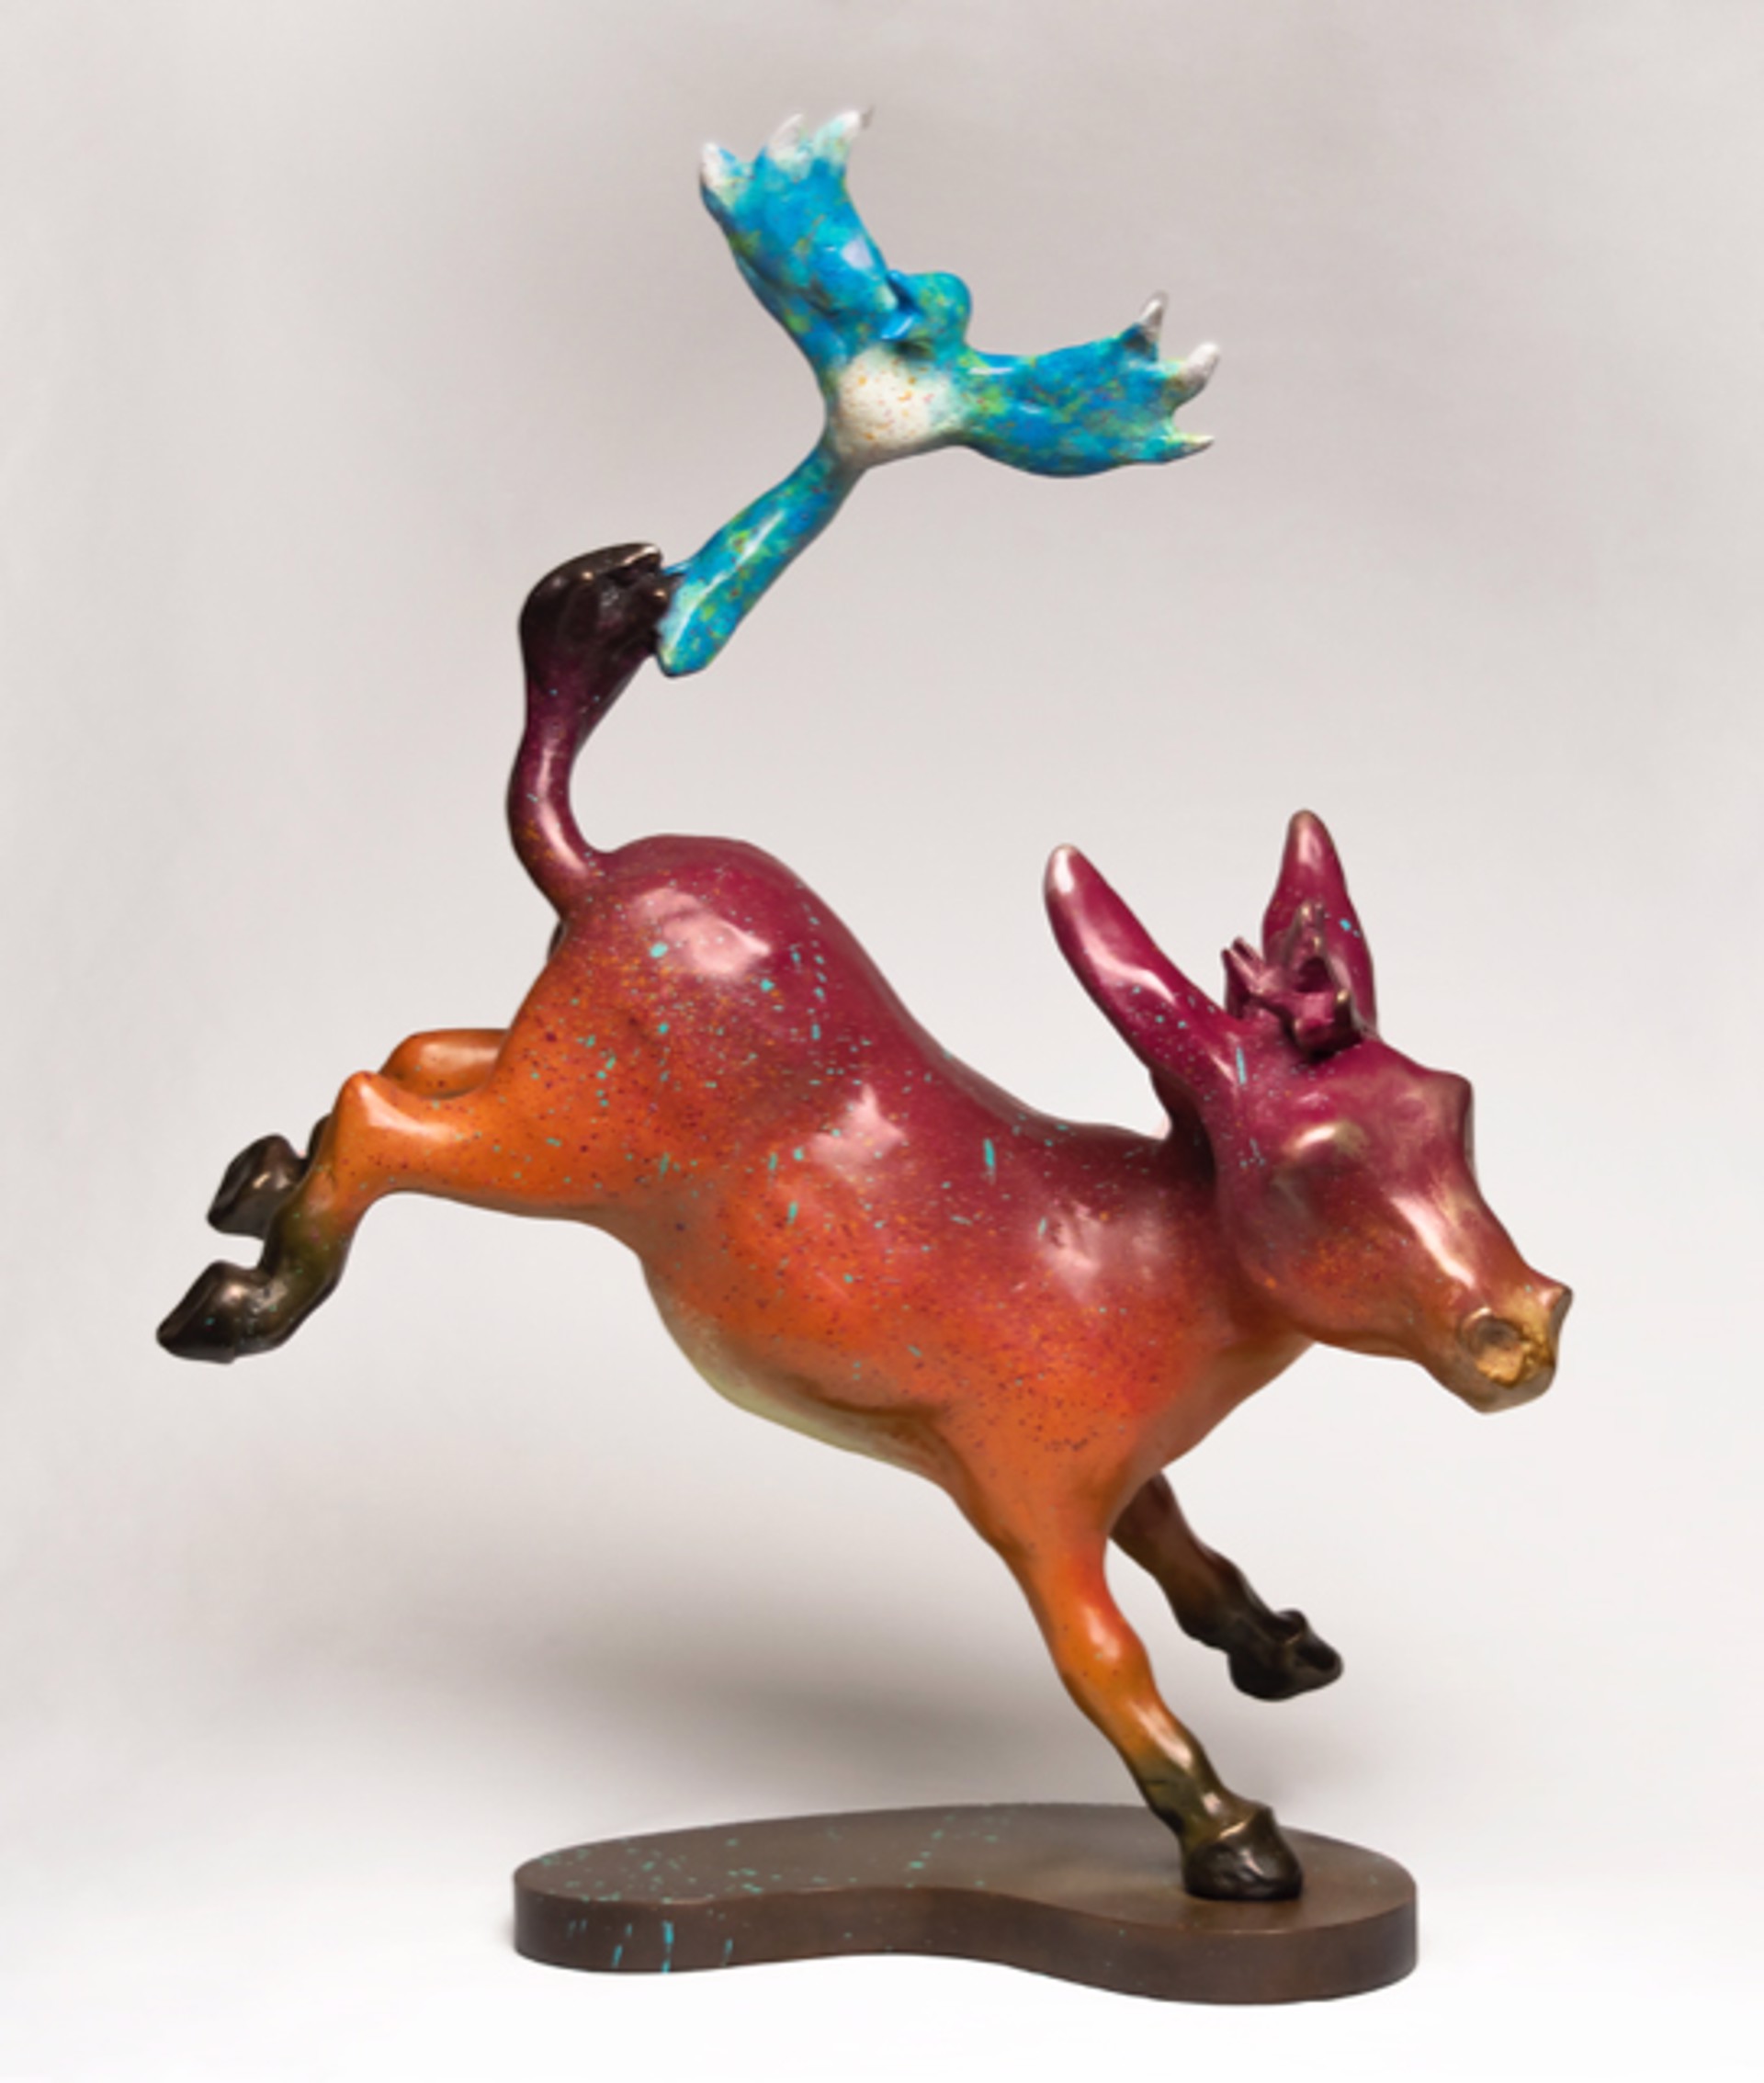 Sunset Hijinks - limited edition bronze with unique color patina by Barbara Meikle